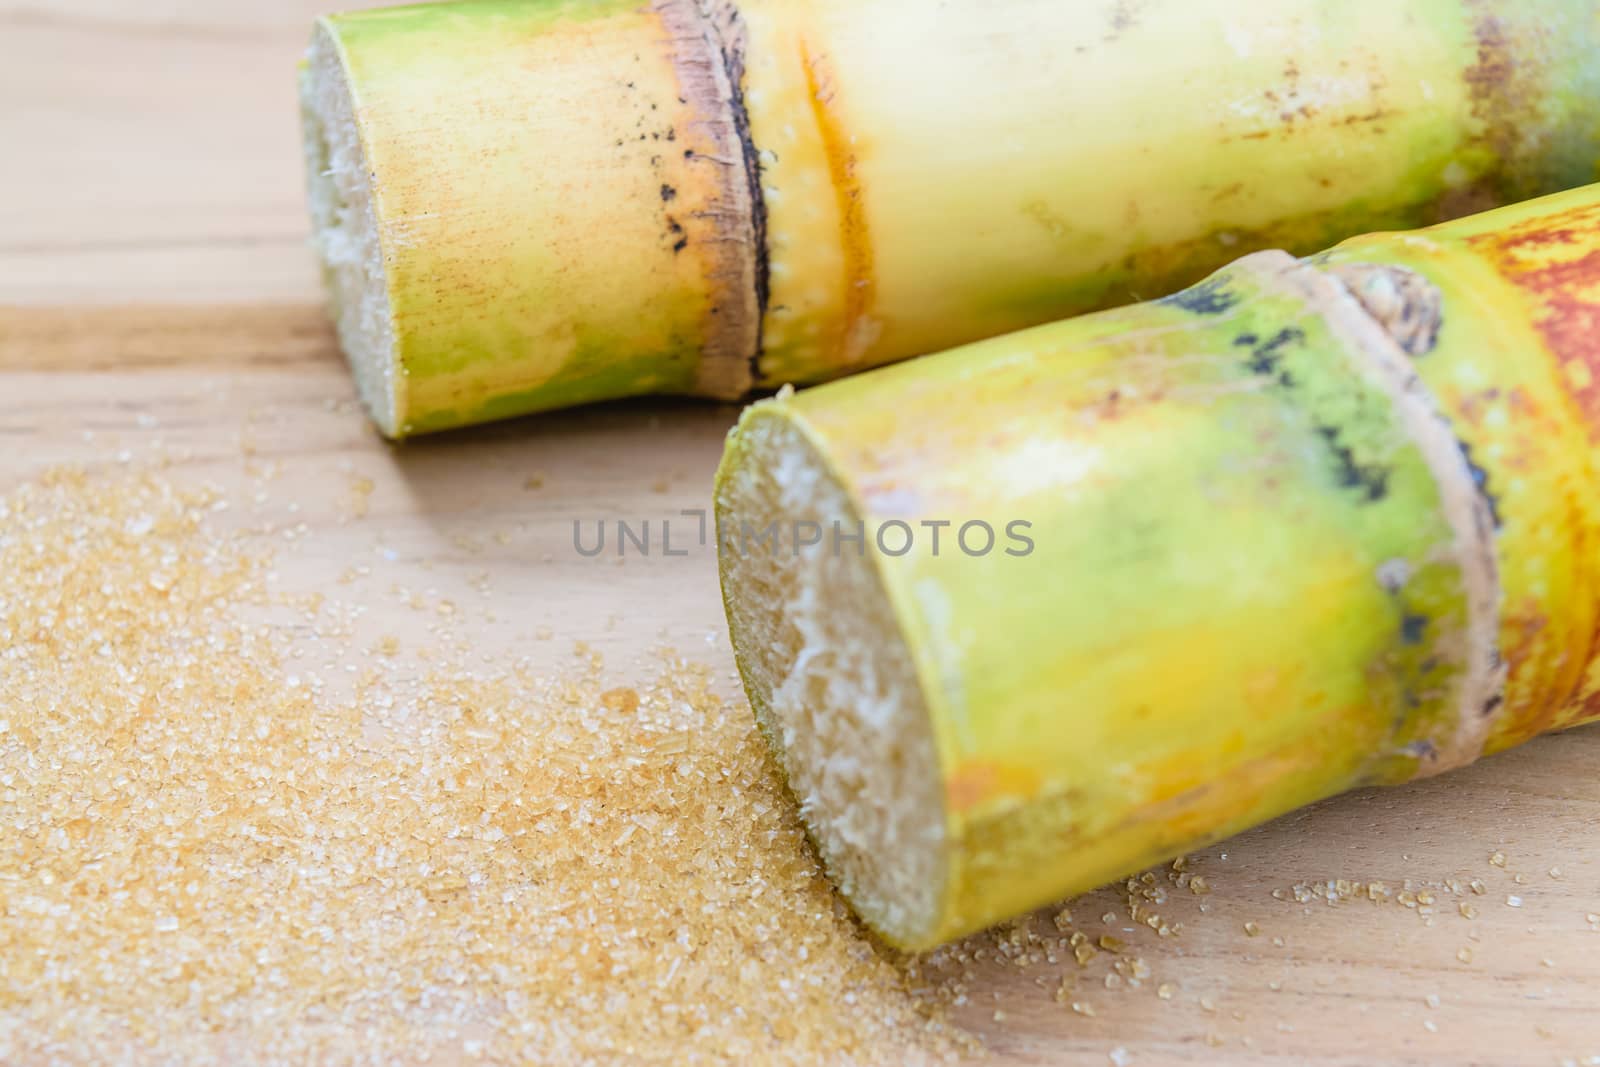 brown sugar and sugarcane on wooden table